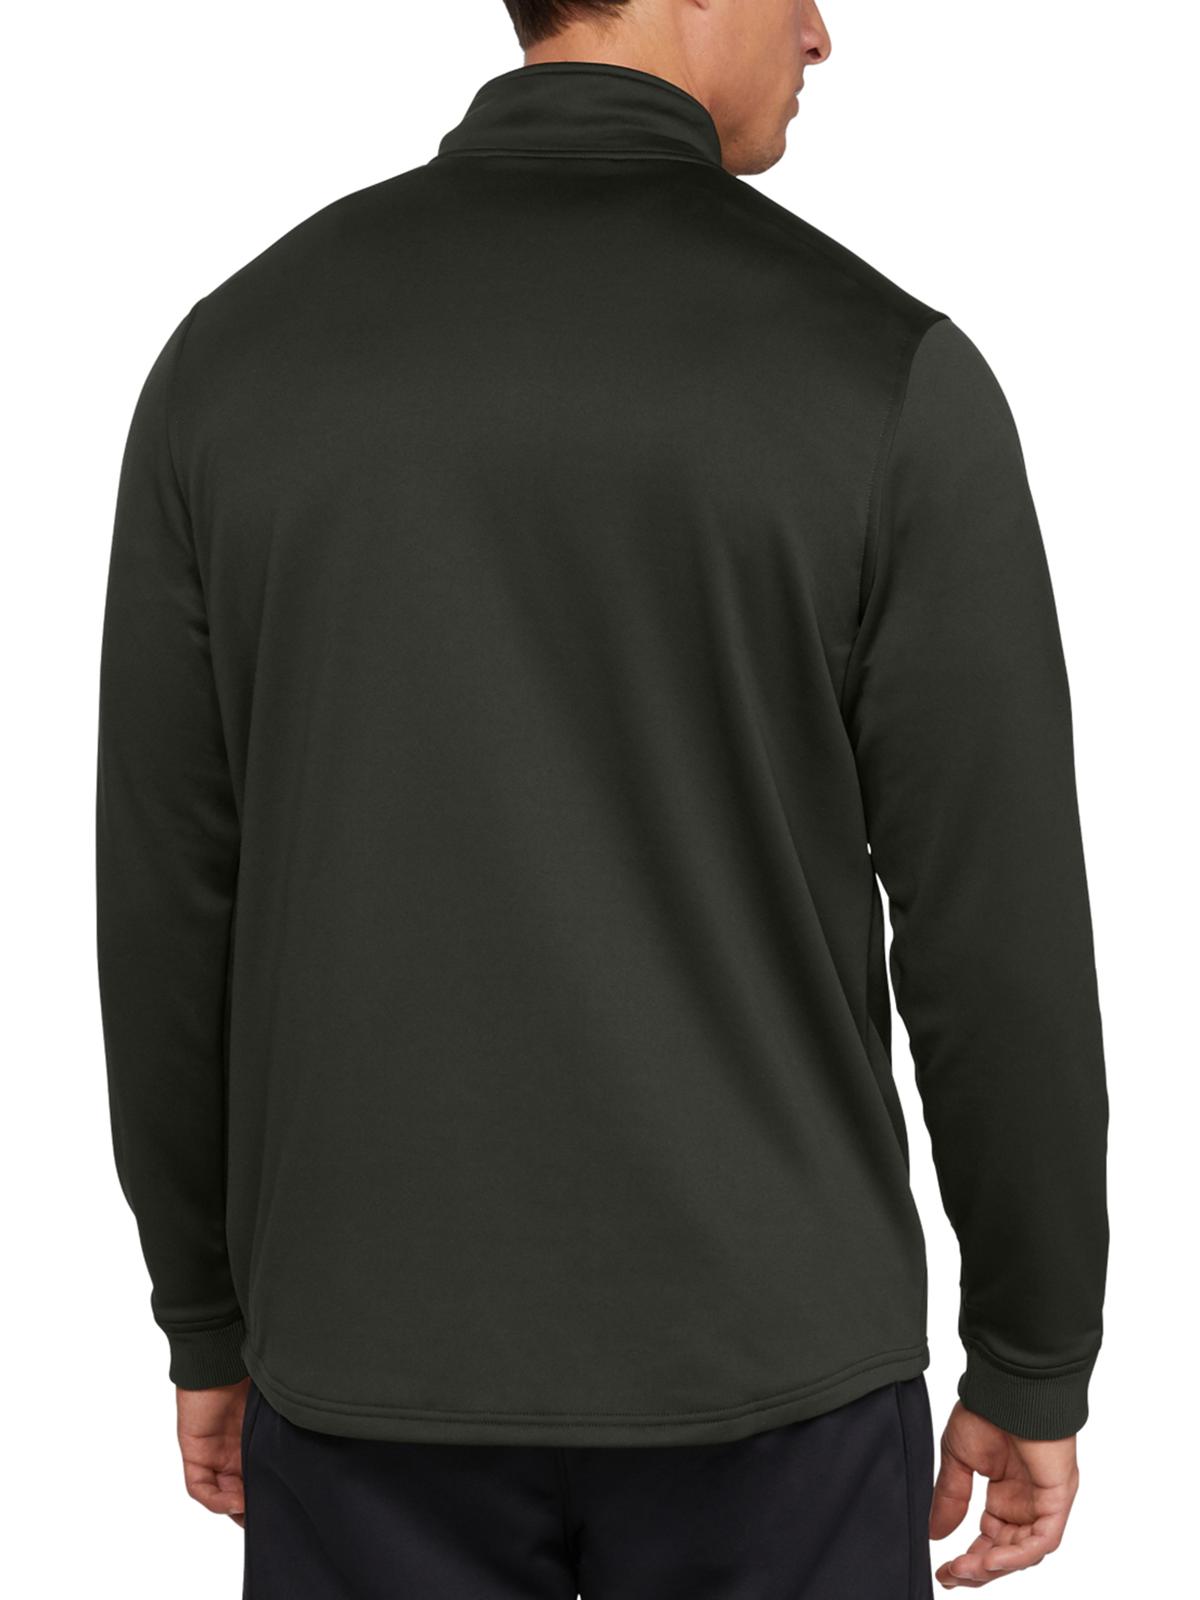 Under Armour Mens Fitness Workout 1/4 Zip Jacket - image 2 of 2